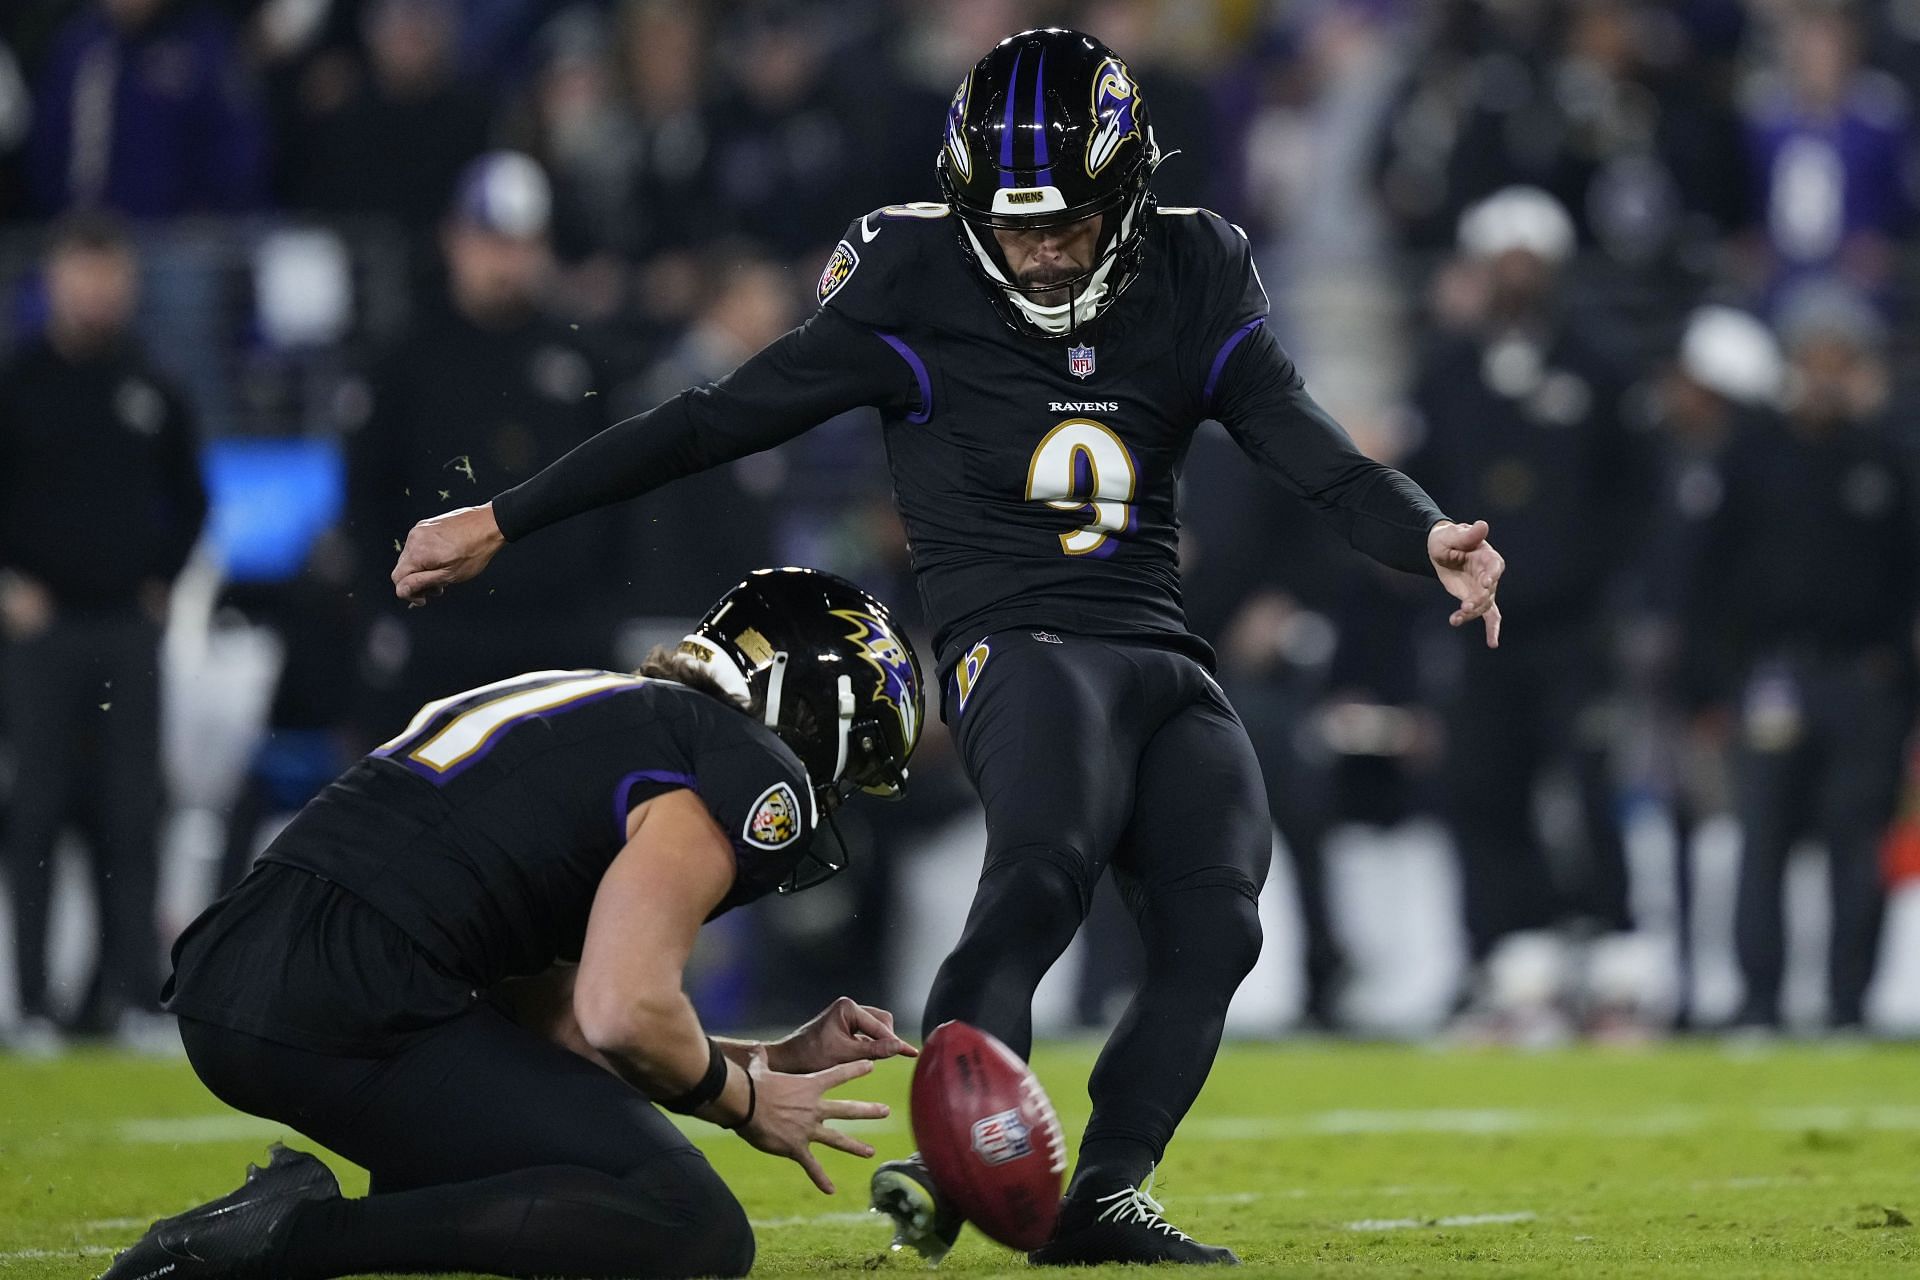 Justin Tucker nailed a FG in this Thanksgiving classic